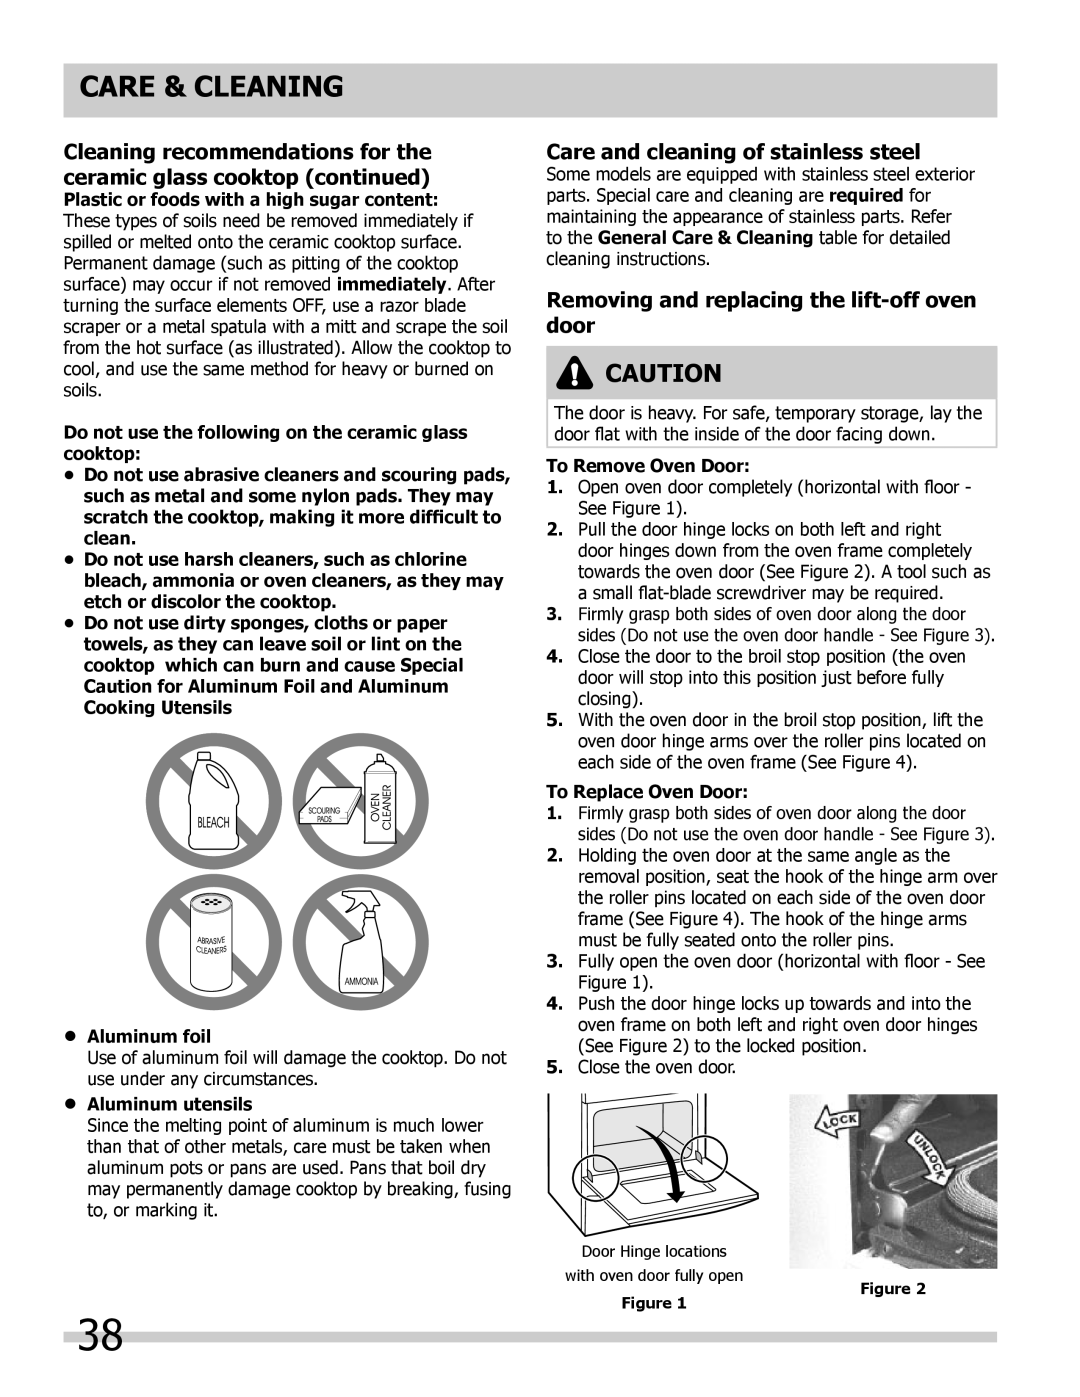 Frigidaire 318205804 Cleaning recommendations for the ceramic glass cooktop continued, Aluminum utensils, Care & Cleaning 